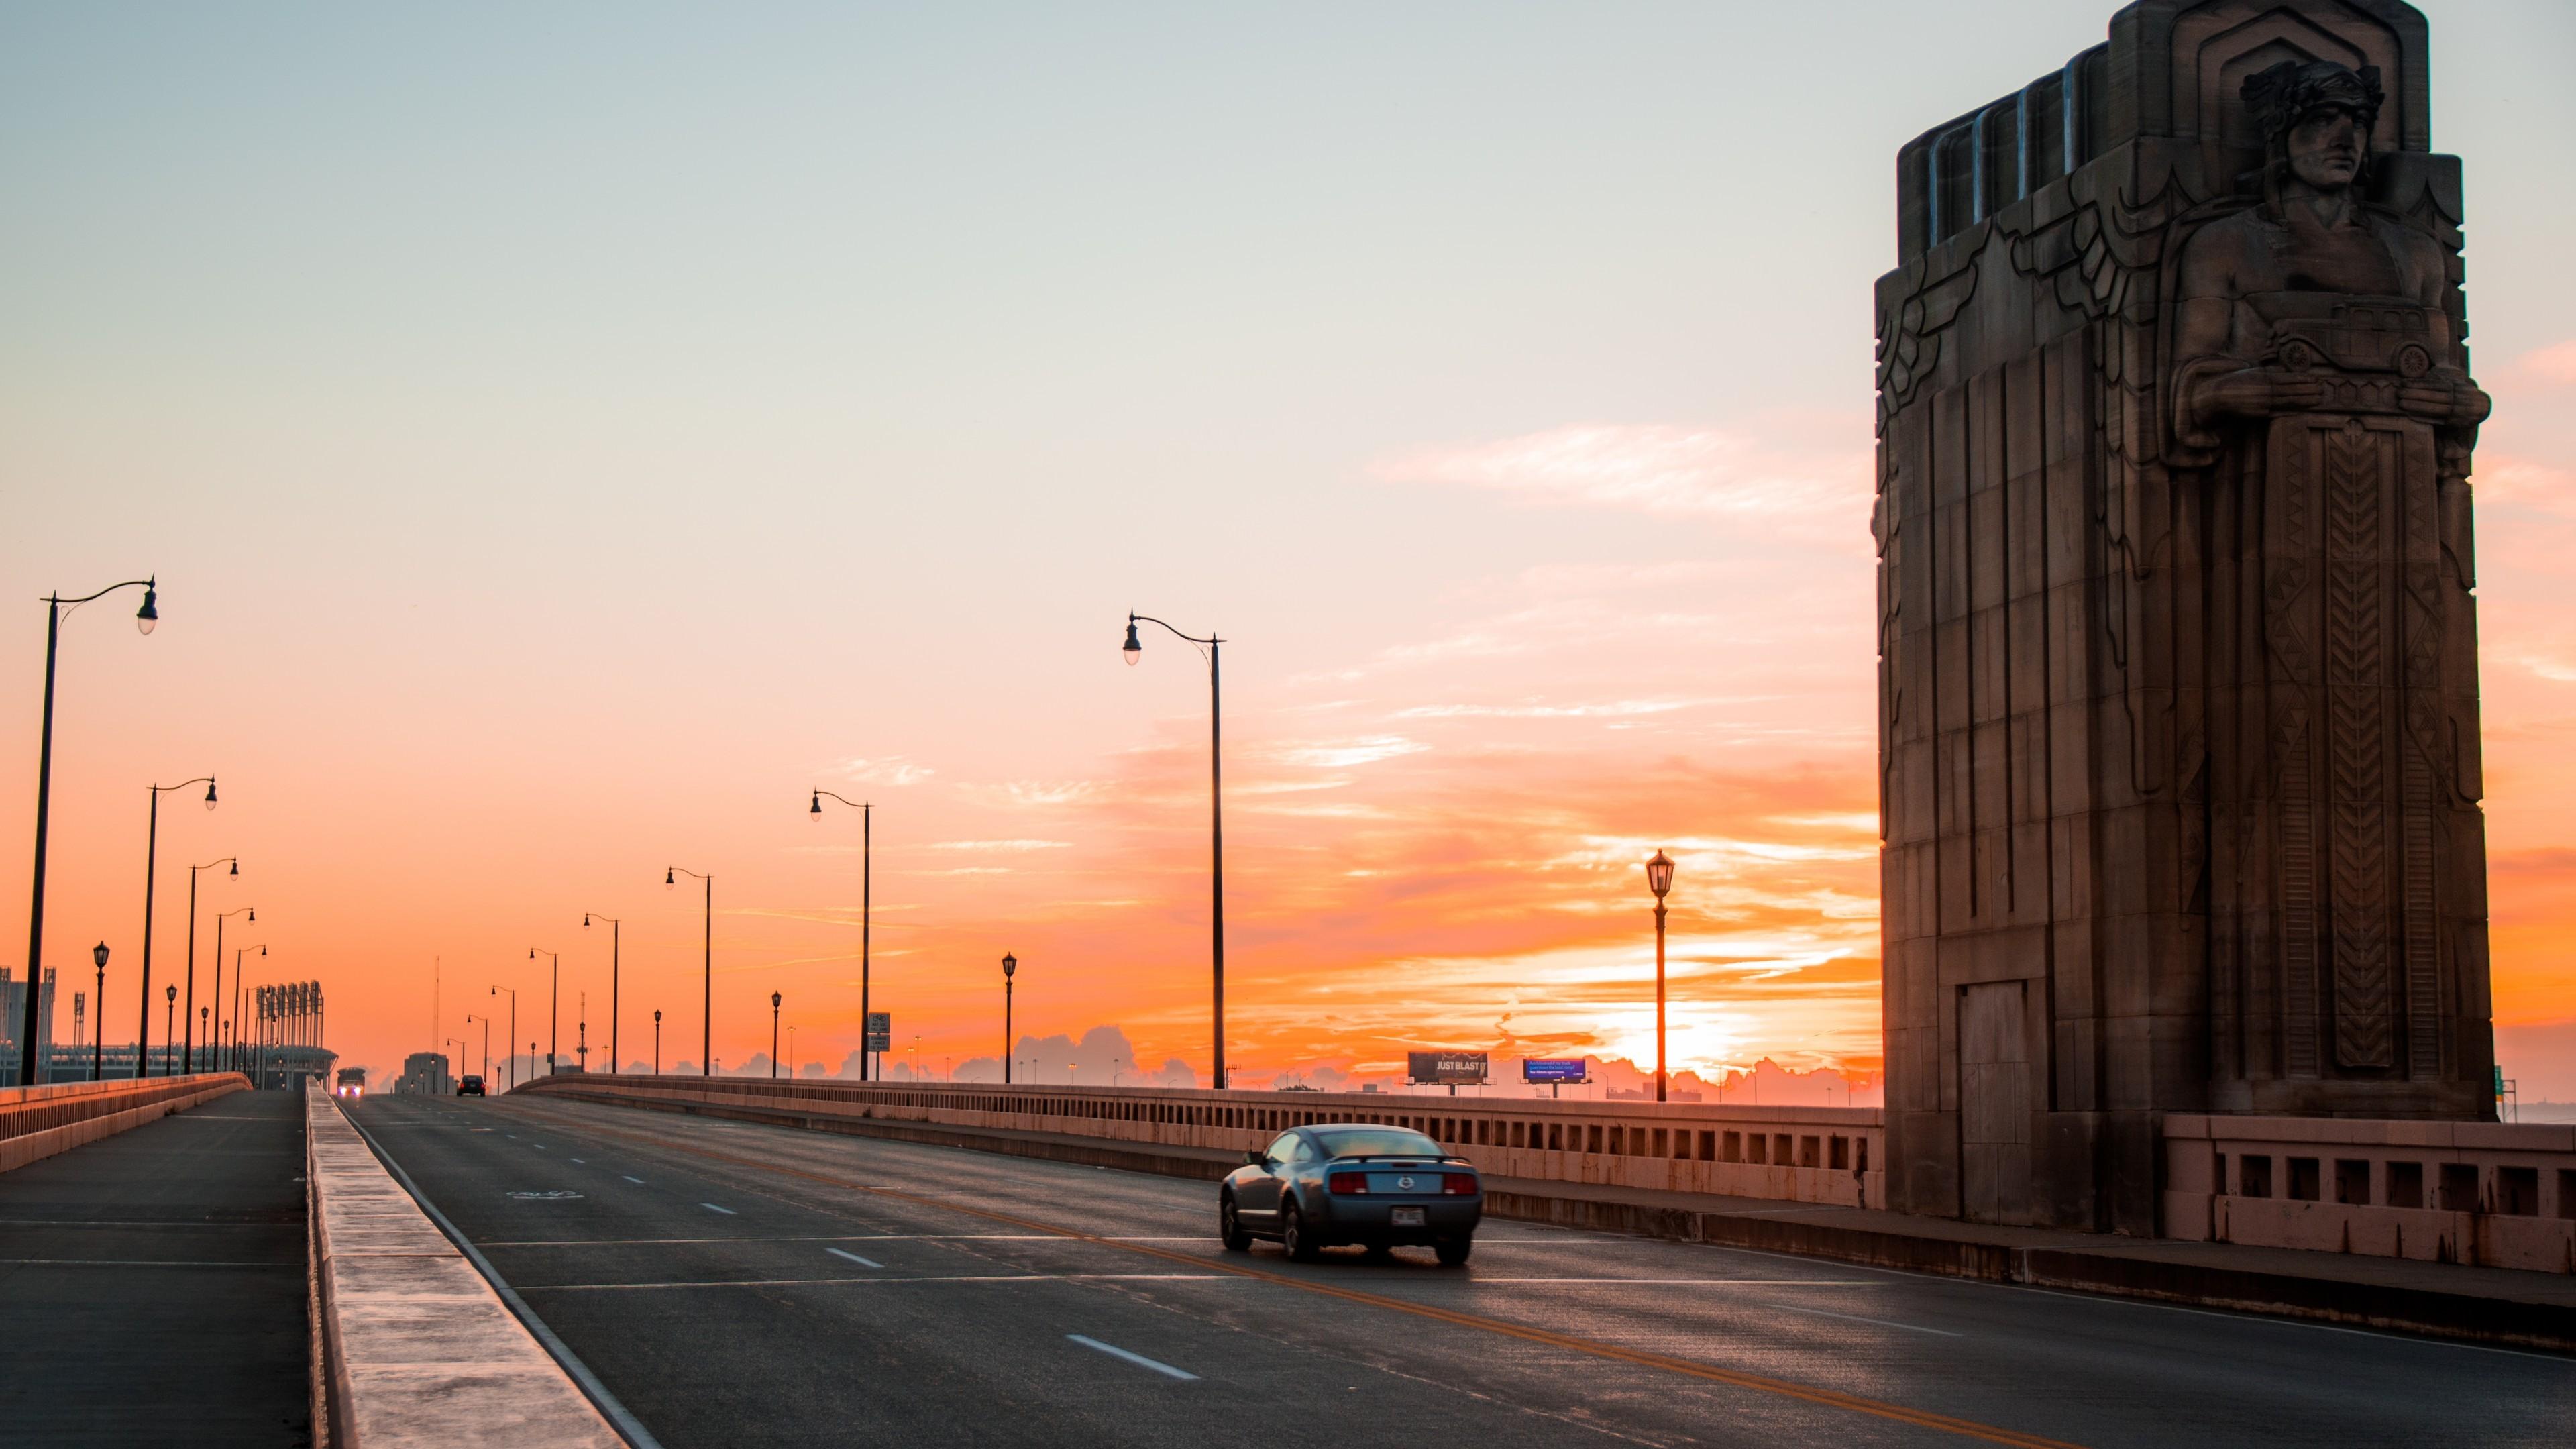 Download 3840x2160 Usa Ohio, Cleveland, Sunset, Car, Road Wallpaper